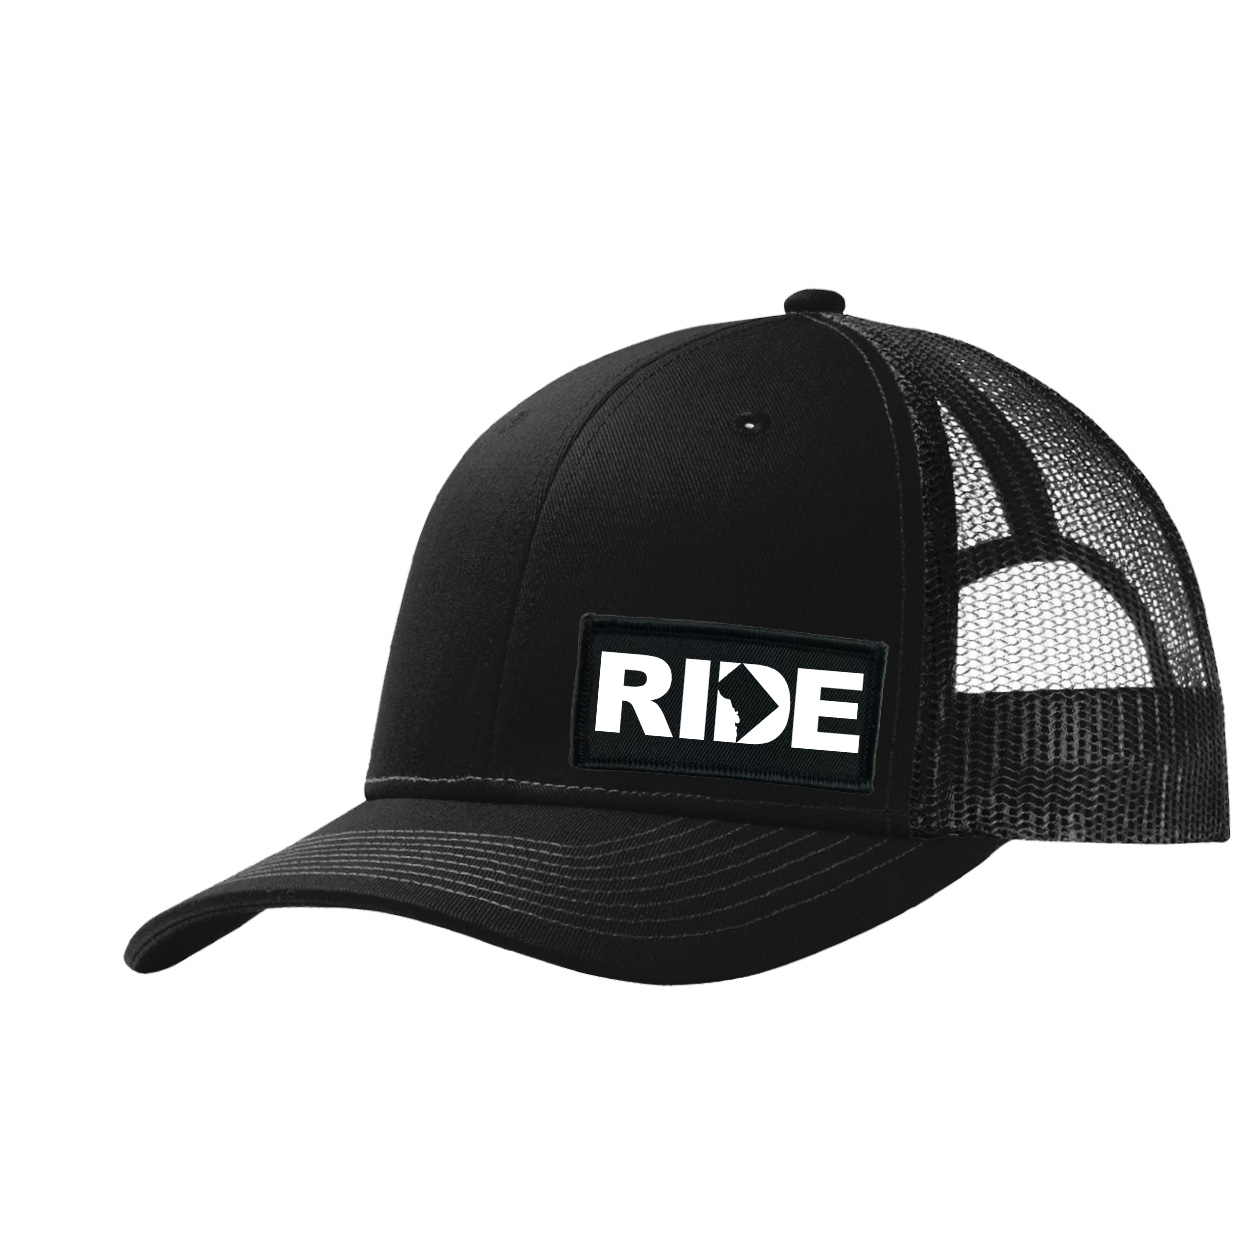 Ride District of Columbia Night Out Woven Patch Snapback Trucker Hat Black (White Logo)